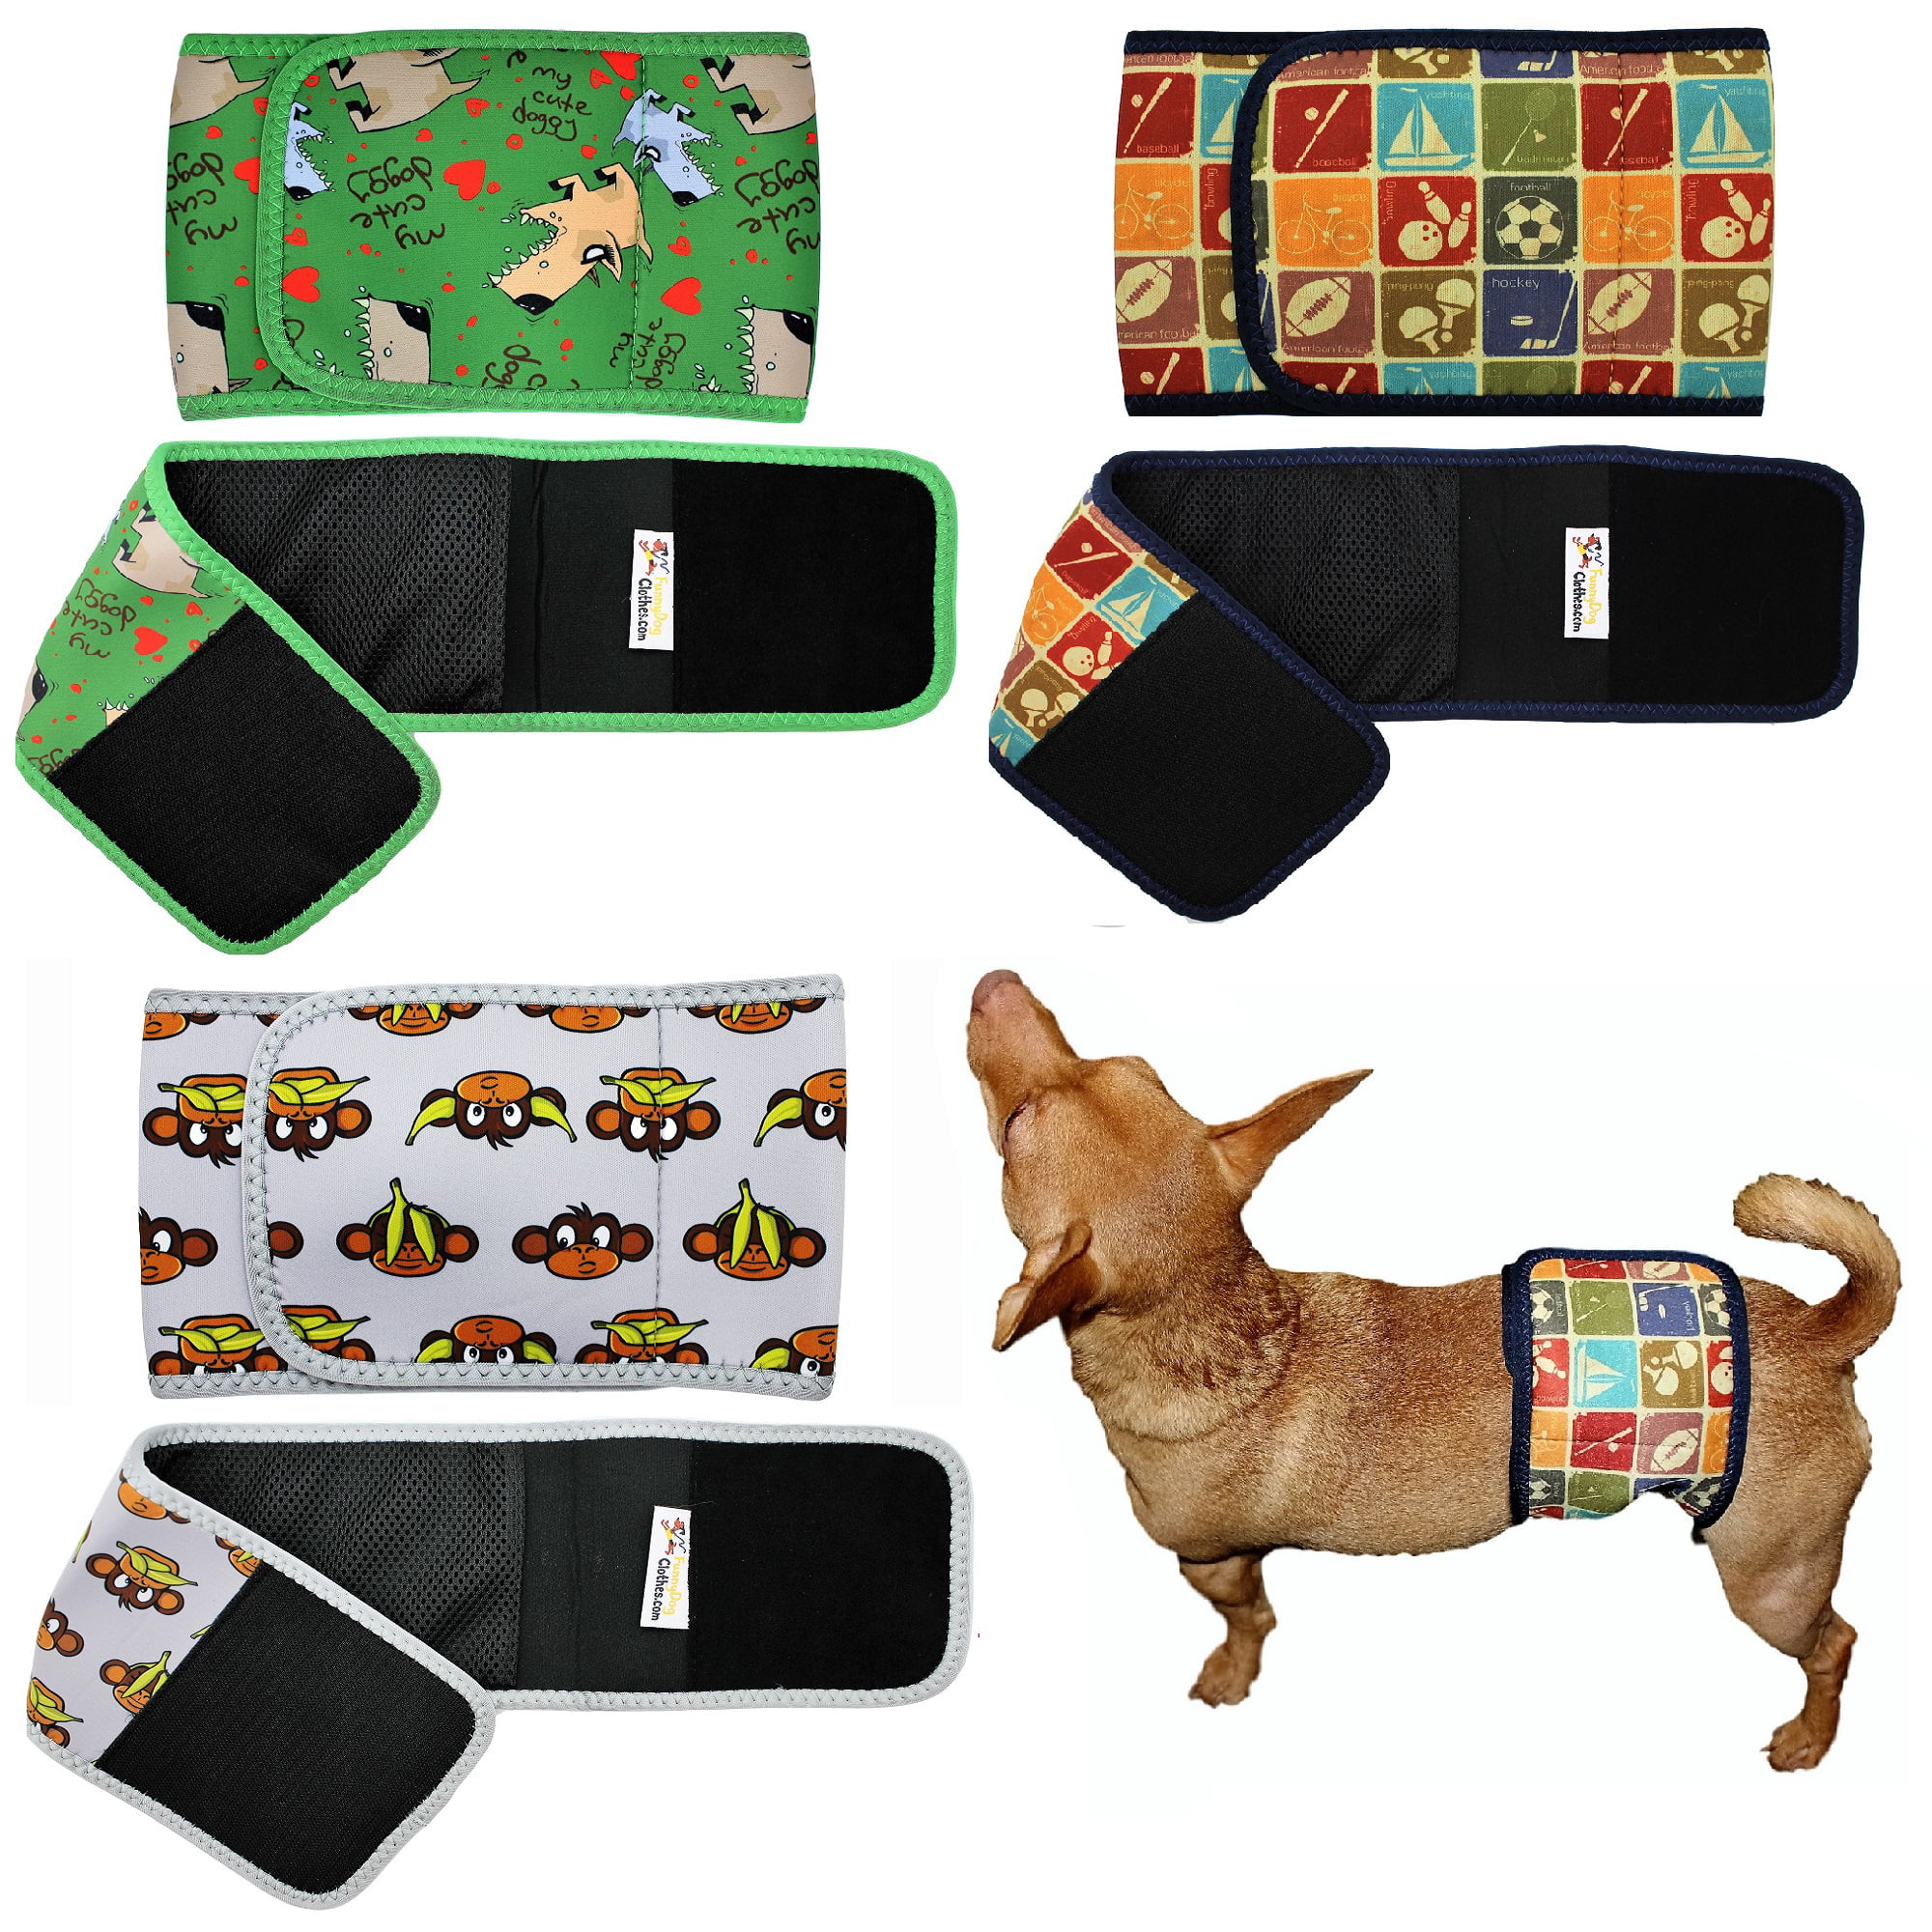 Male dog diaper belly band wrap custom sizes 14" up to 18" waist 